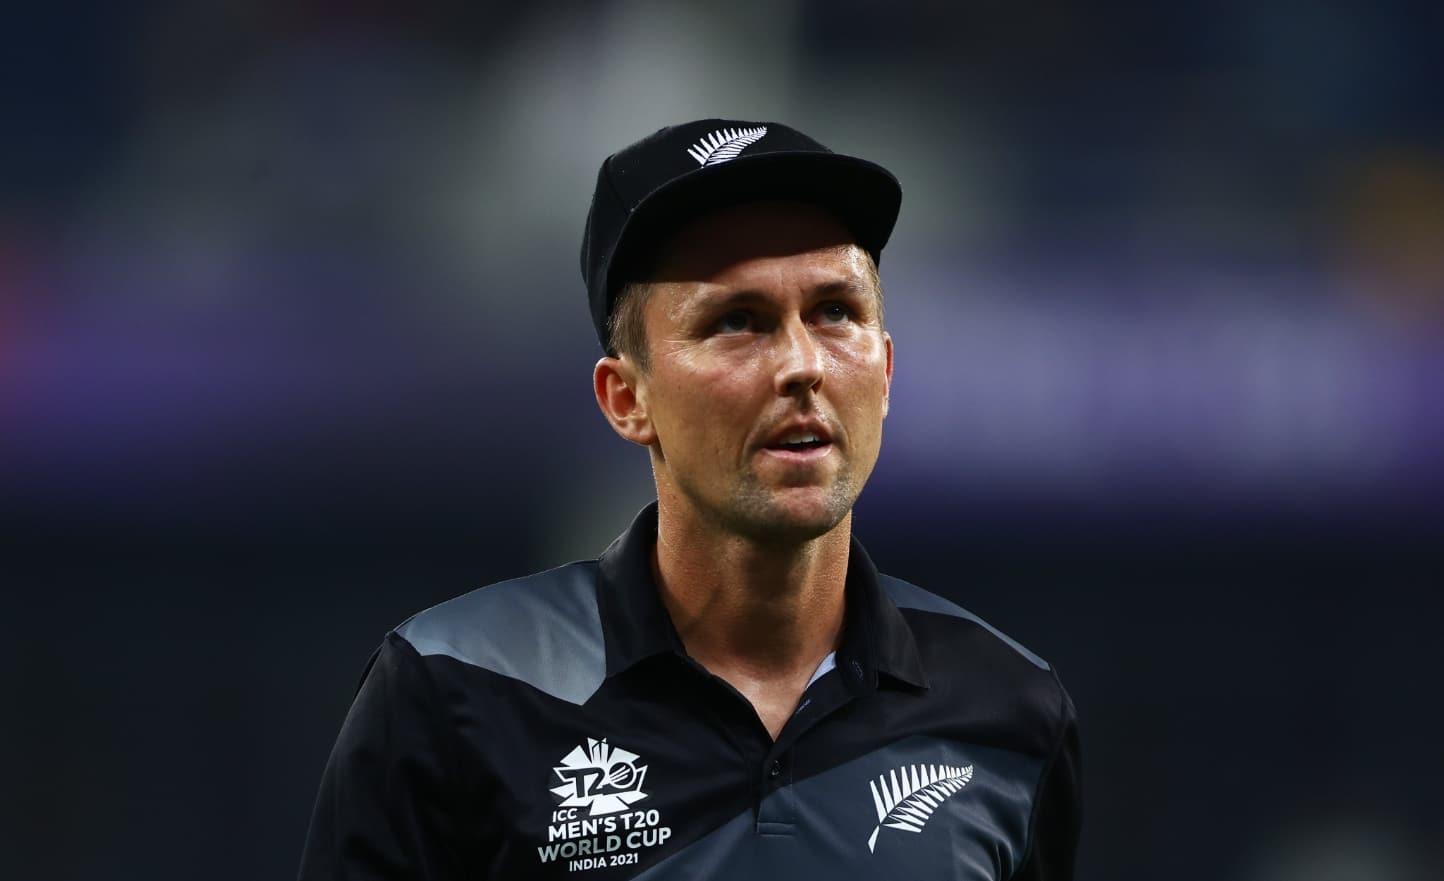 Scott Styris speaks on Boult's release from NZ Central Contract